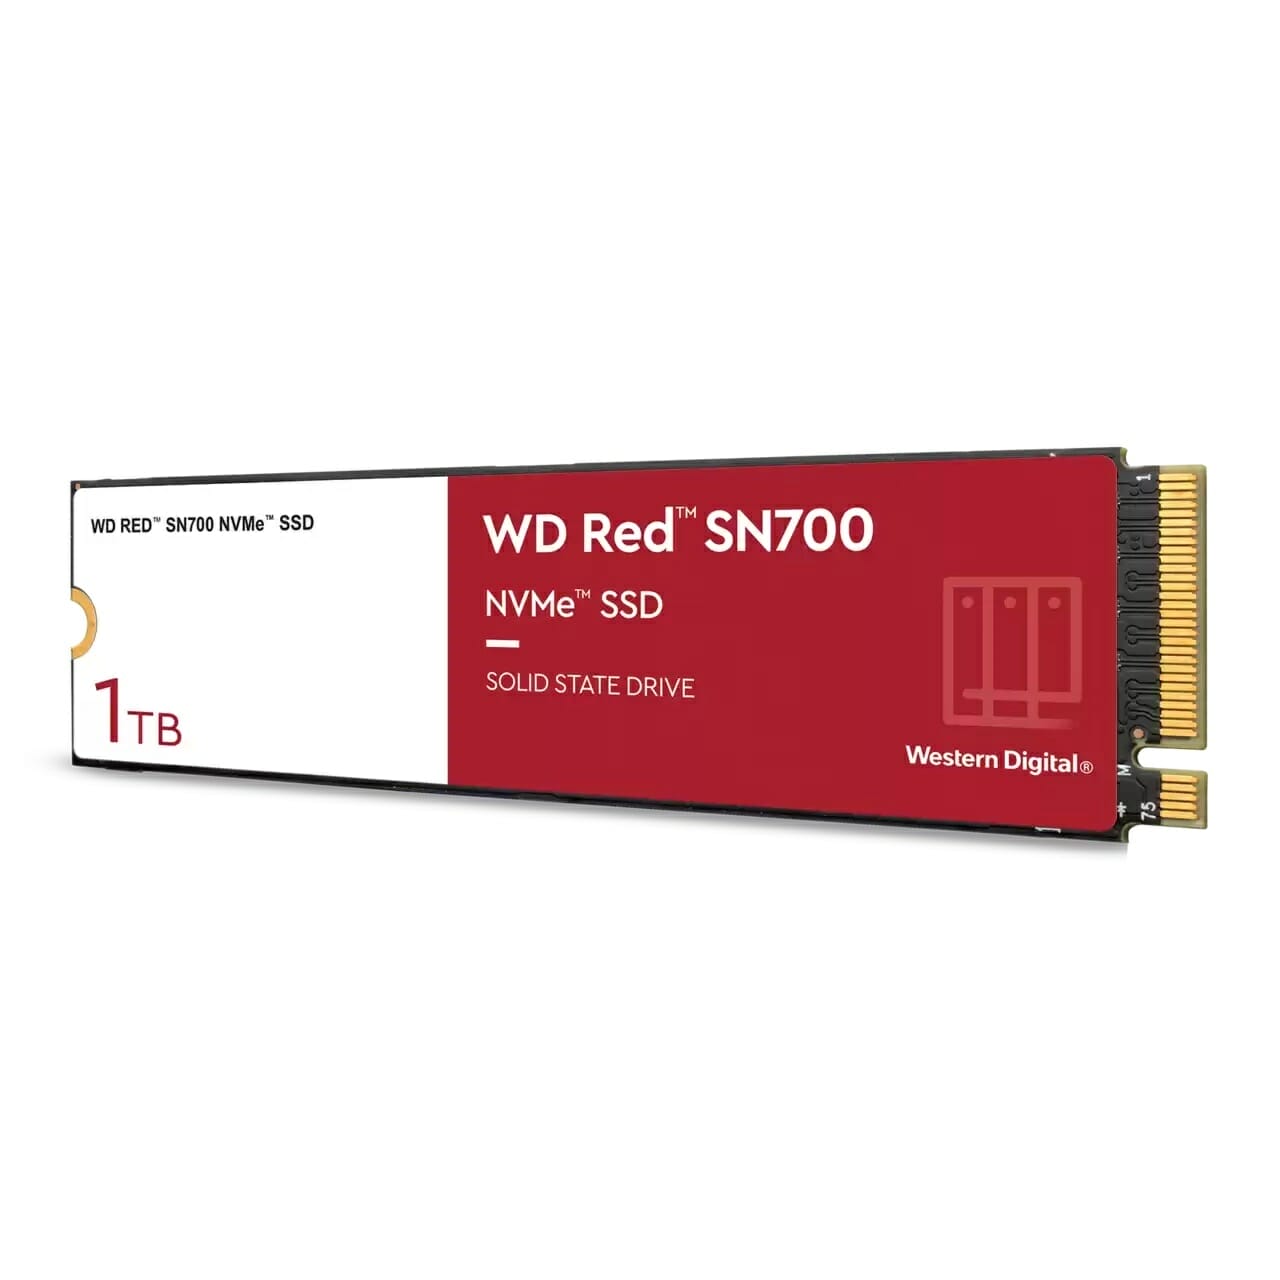 wd-red-sn700-nvme-ssd